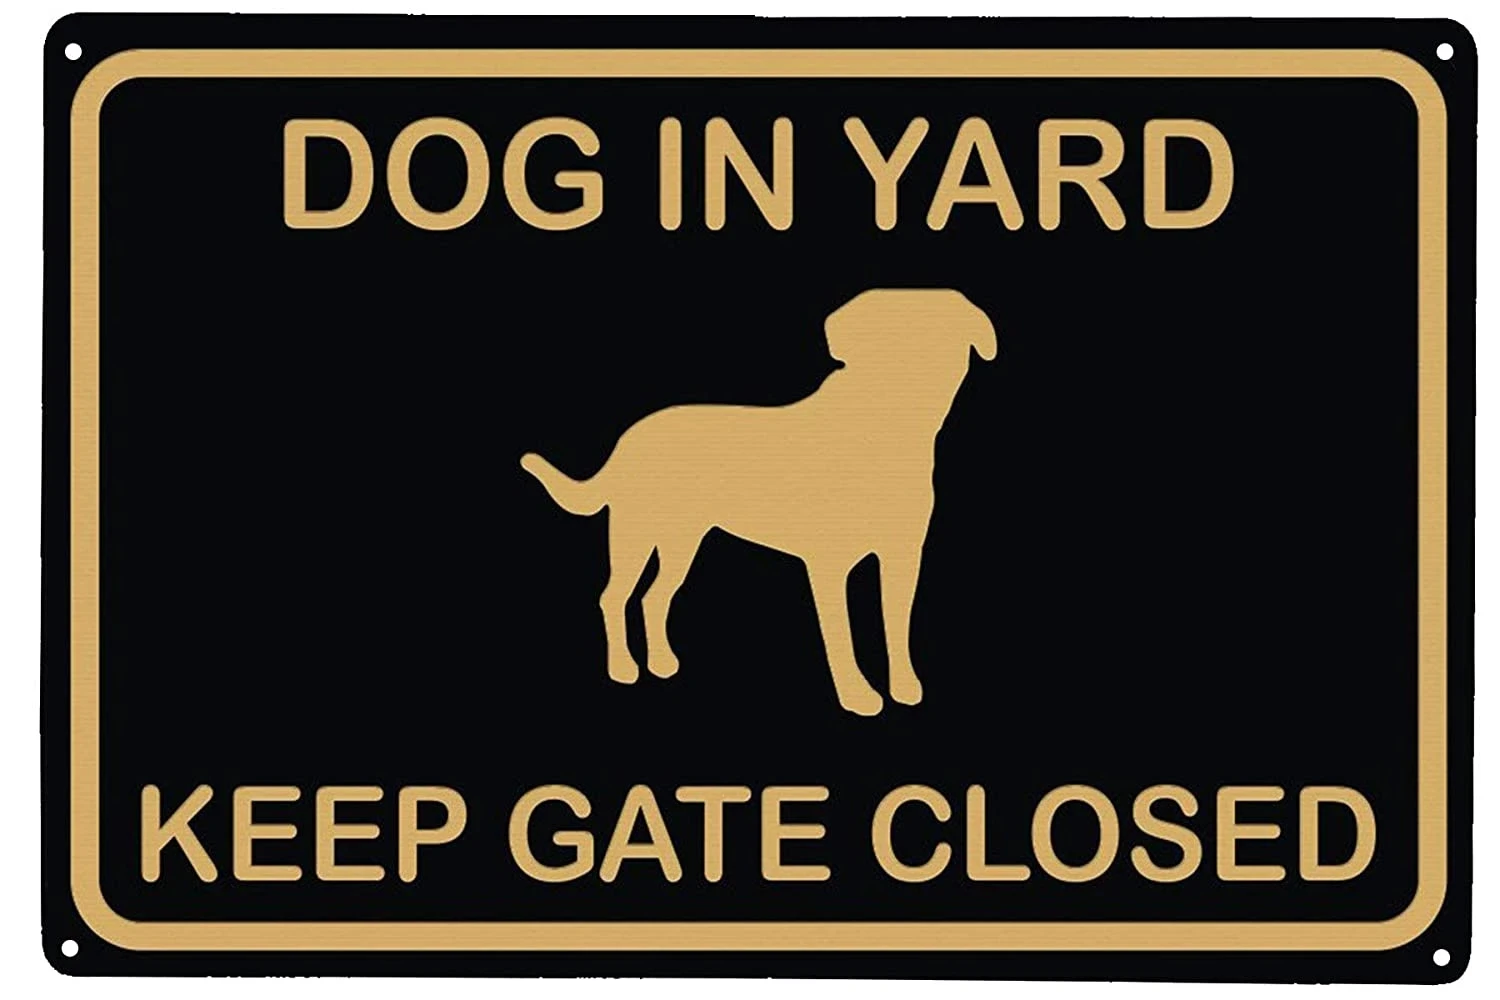 

Dog in Yard Keep Gate Closed Wall Door Sign Please Keep Gate Closed Vintage Retro Metal Indoor Outdoor Road Firm Water Decor